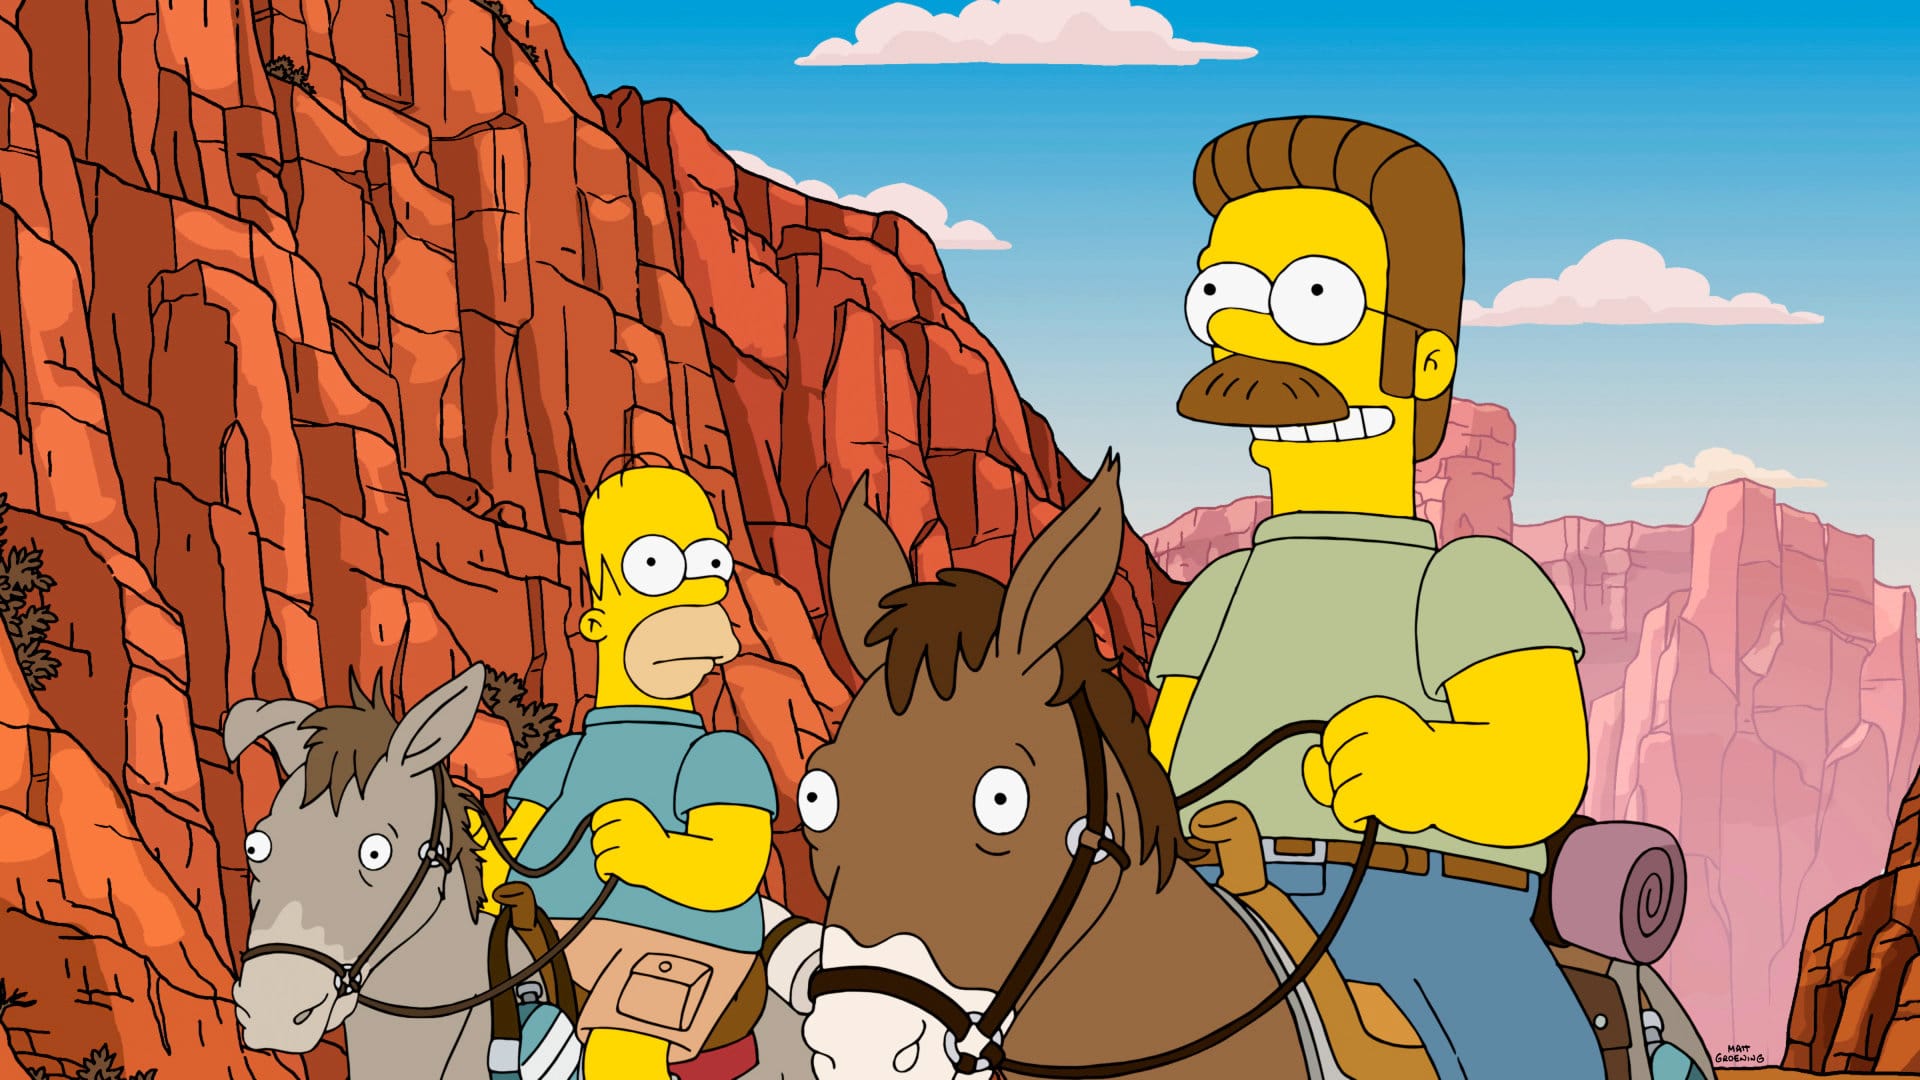 The Simpsons - Fland Canyon